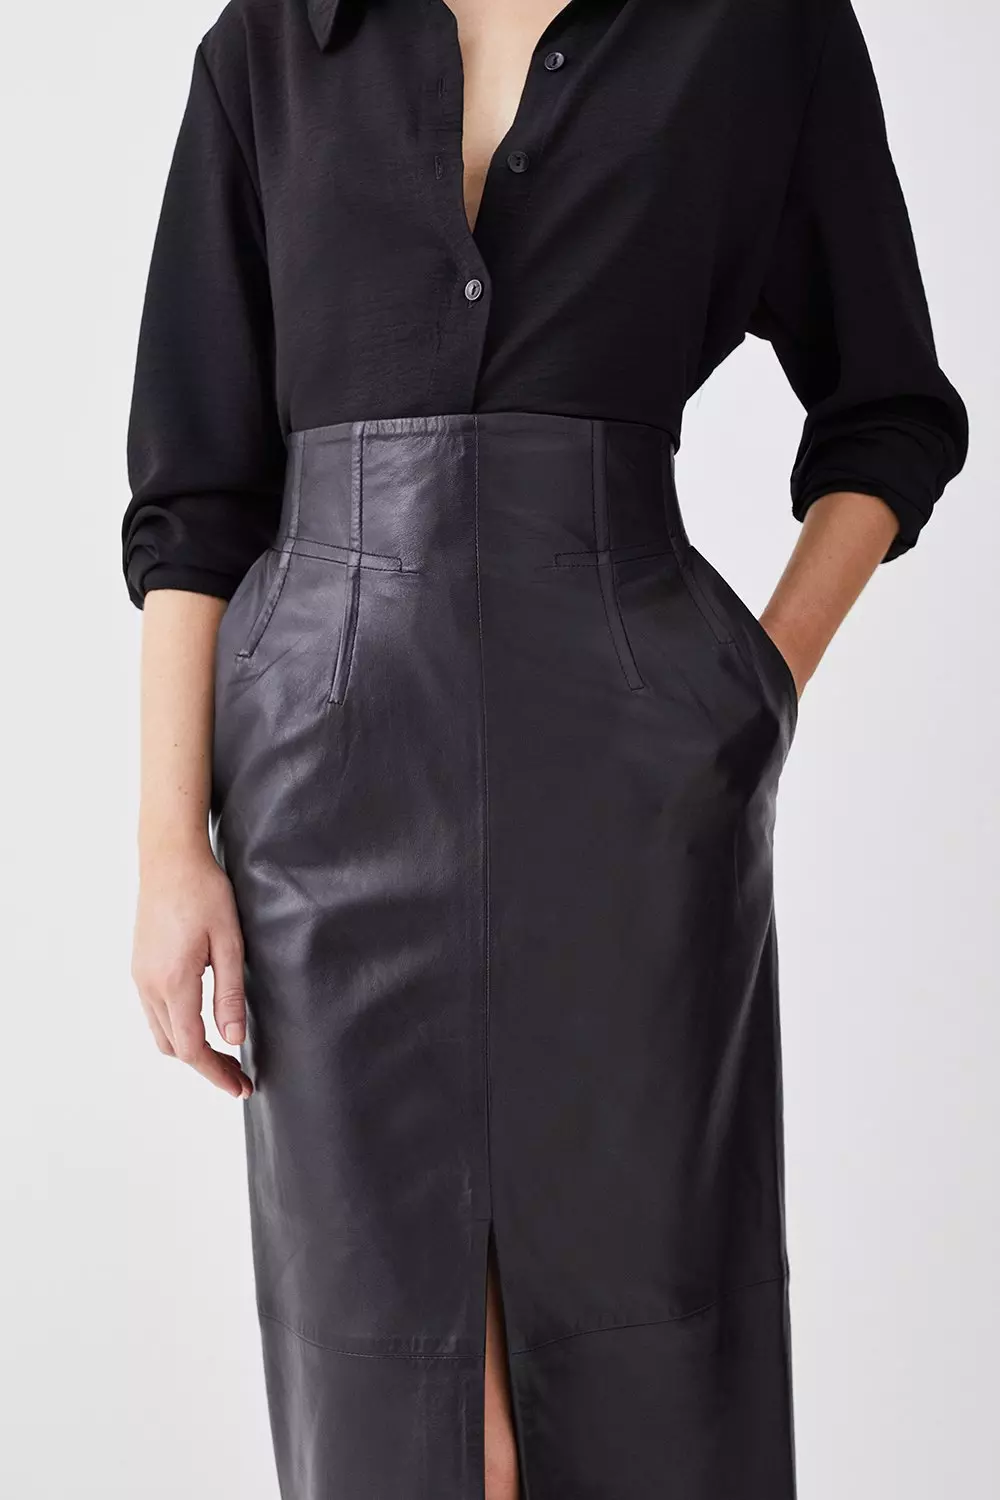 Faux Leather Stretch Pencil Skirt - 27